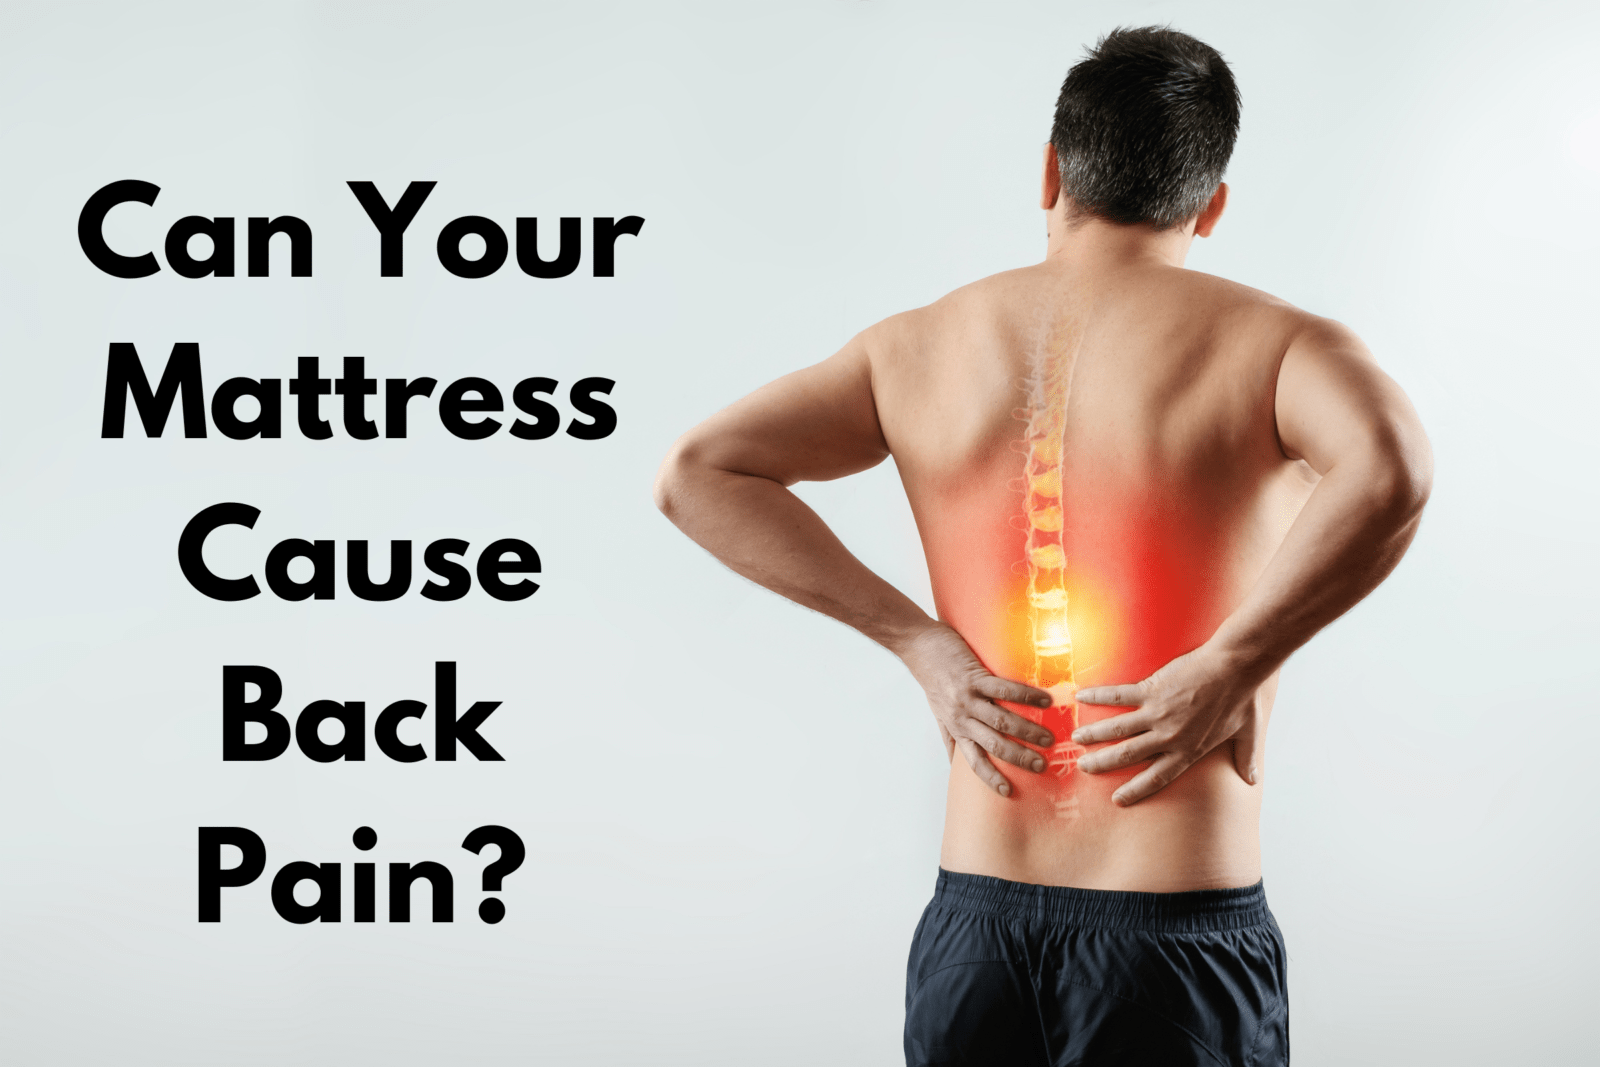 Can Your Mattress Cause Back Pain?